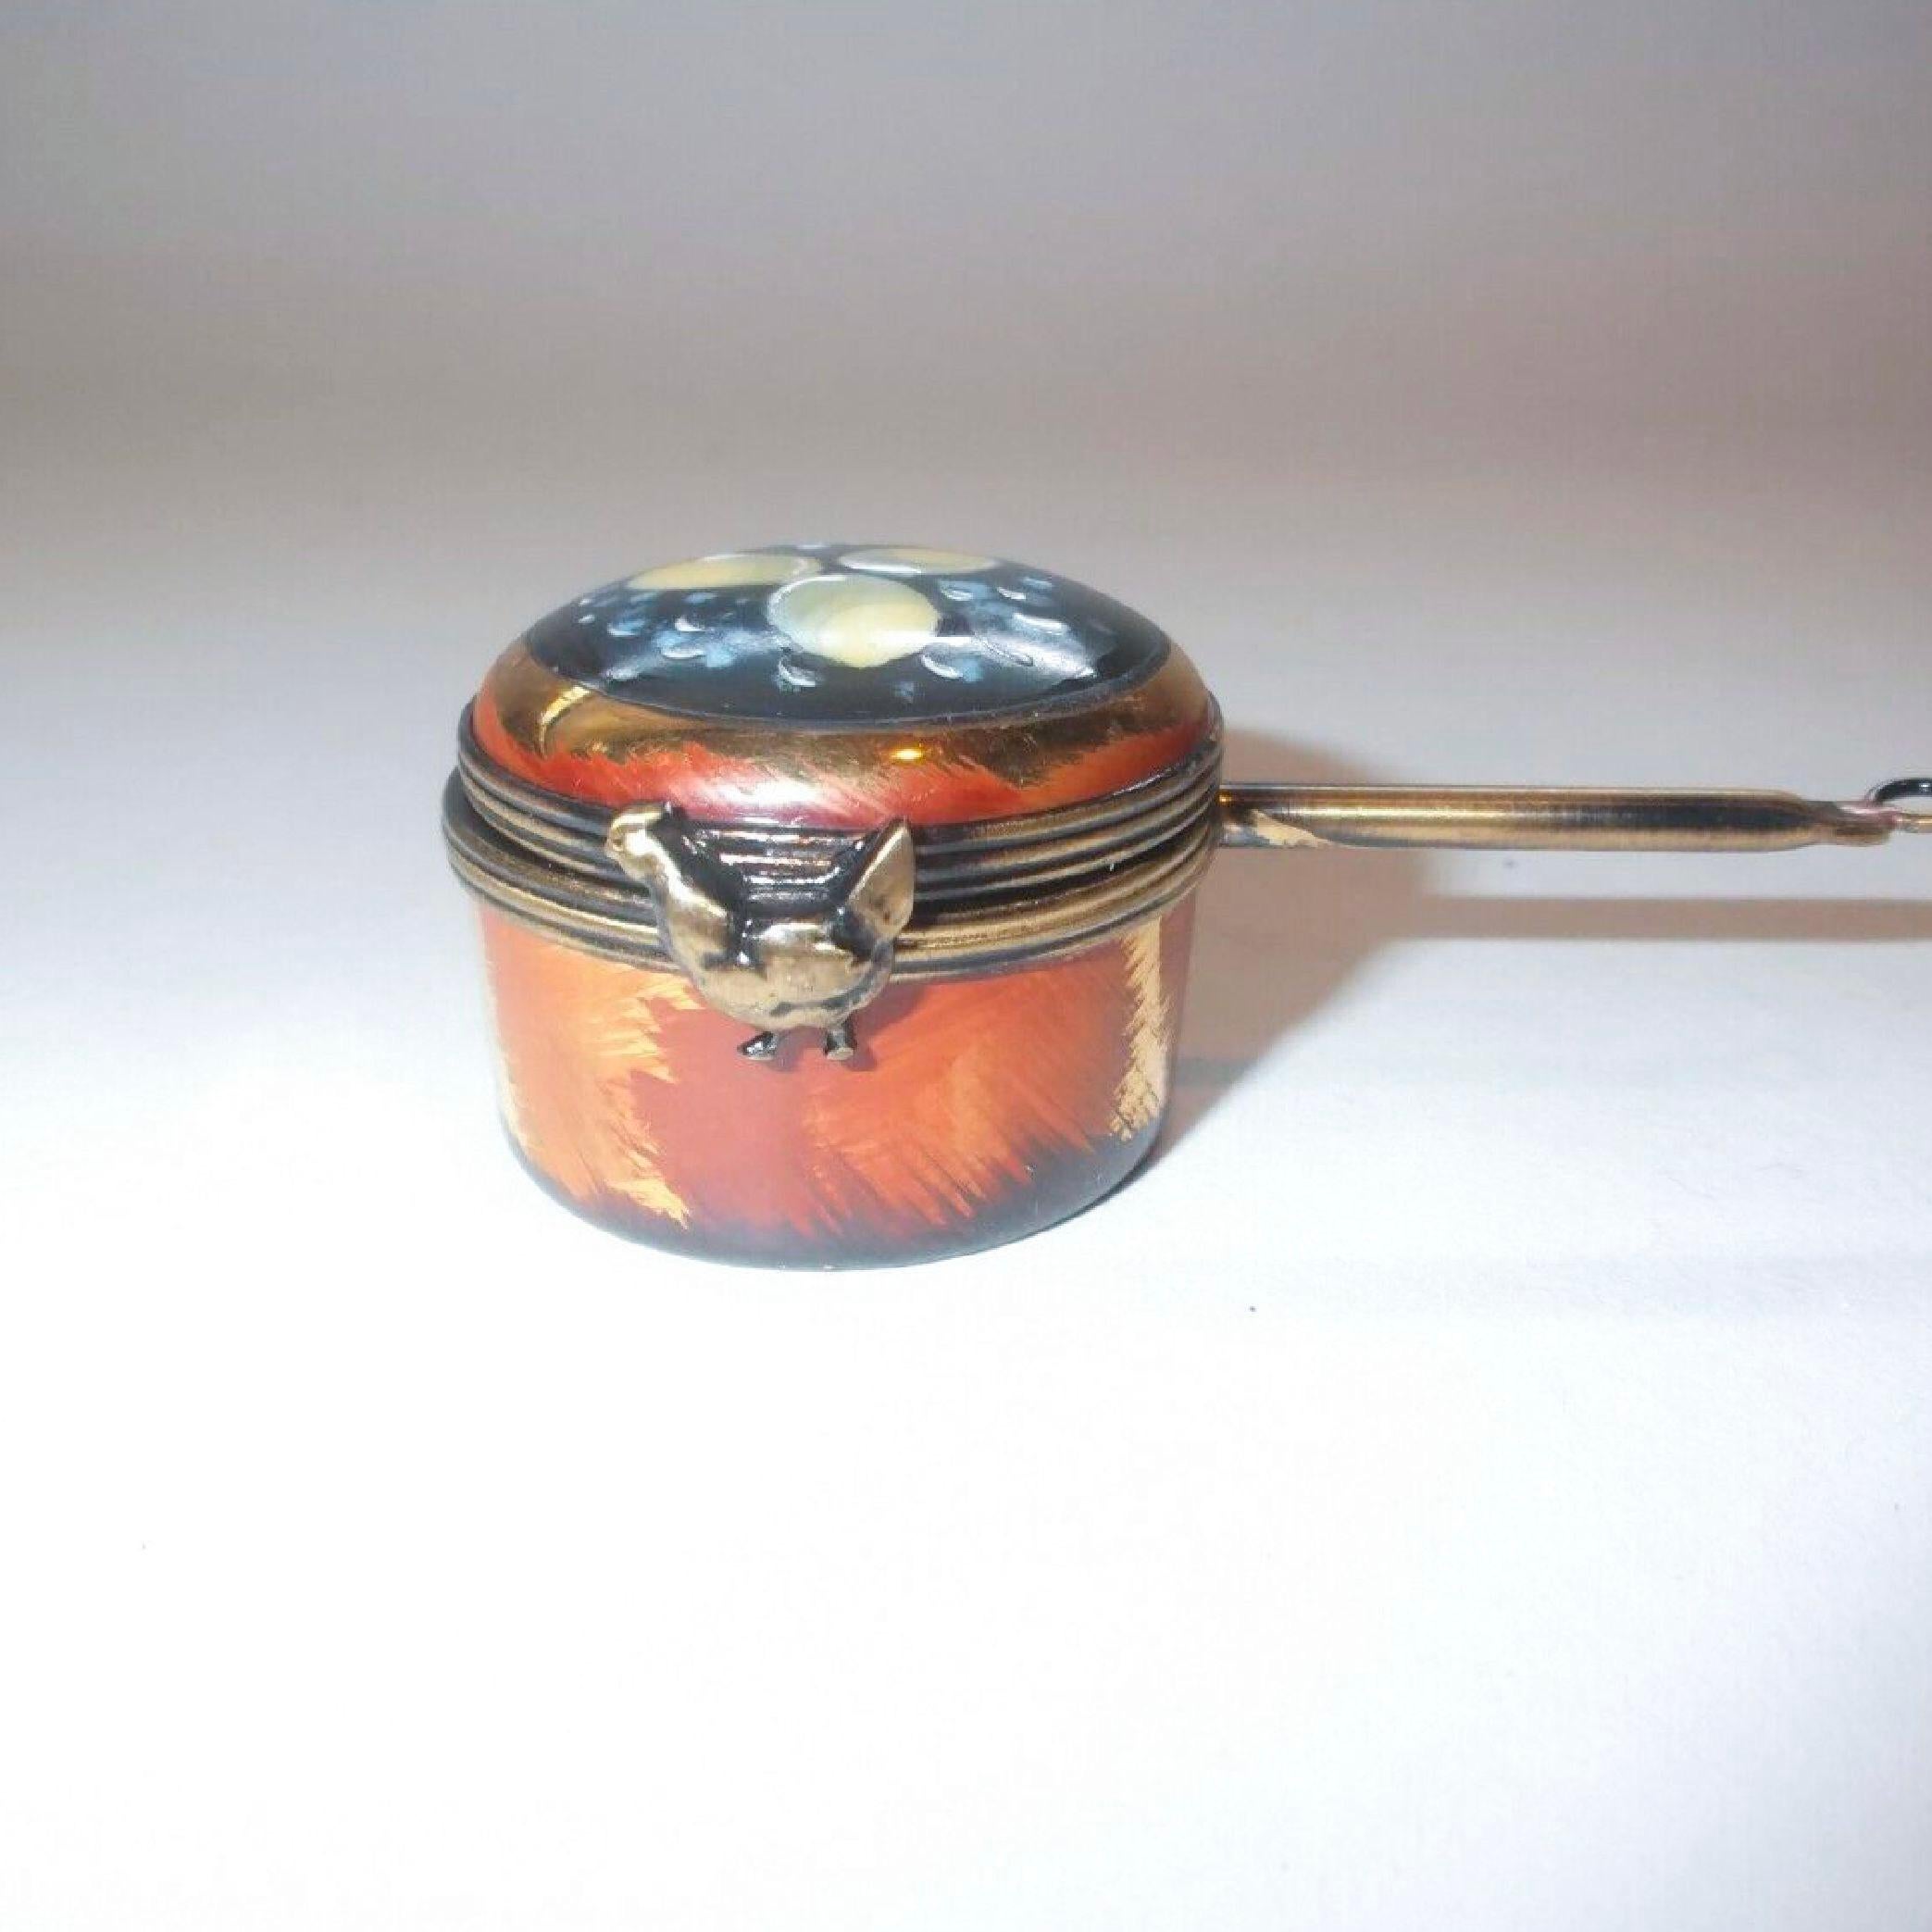 Midcentury handmade Limoges miniature - Copper color saucepan by Lagloriette, long handle with a hanging hook at the end the top of the box is painted with three eggs surrounded by boiling water. The clasp is in the form of a hen. Inside are two